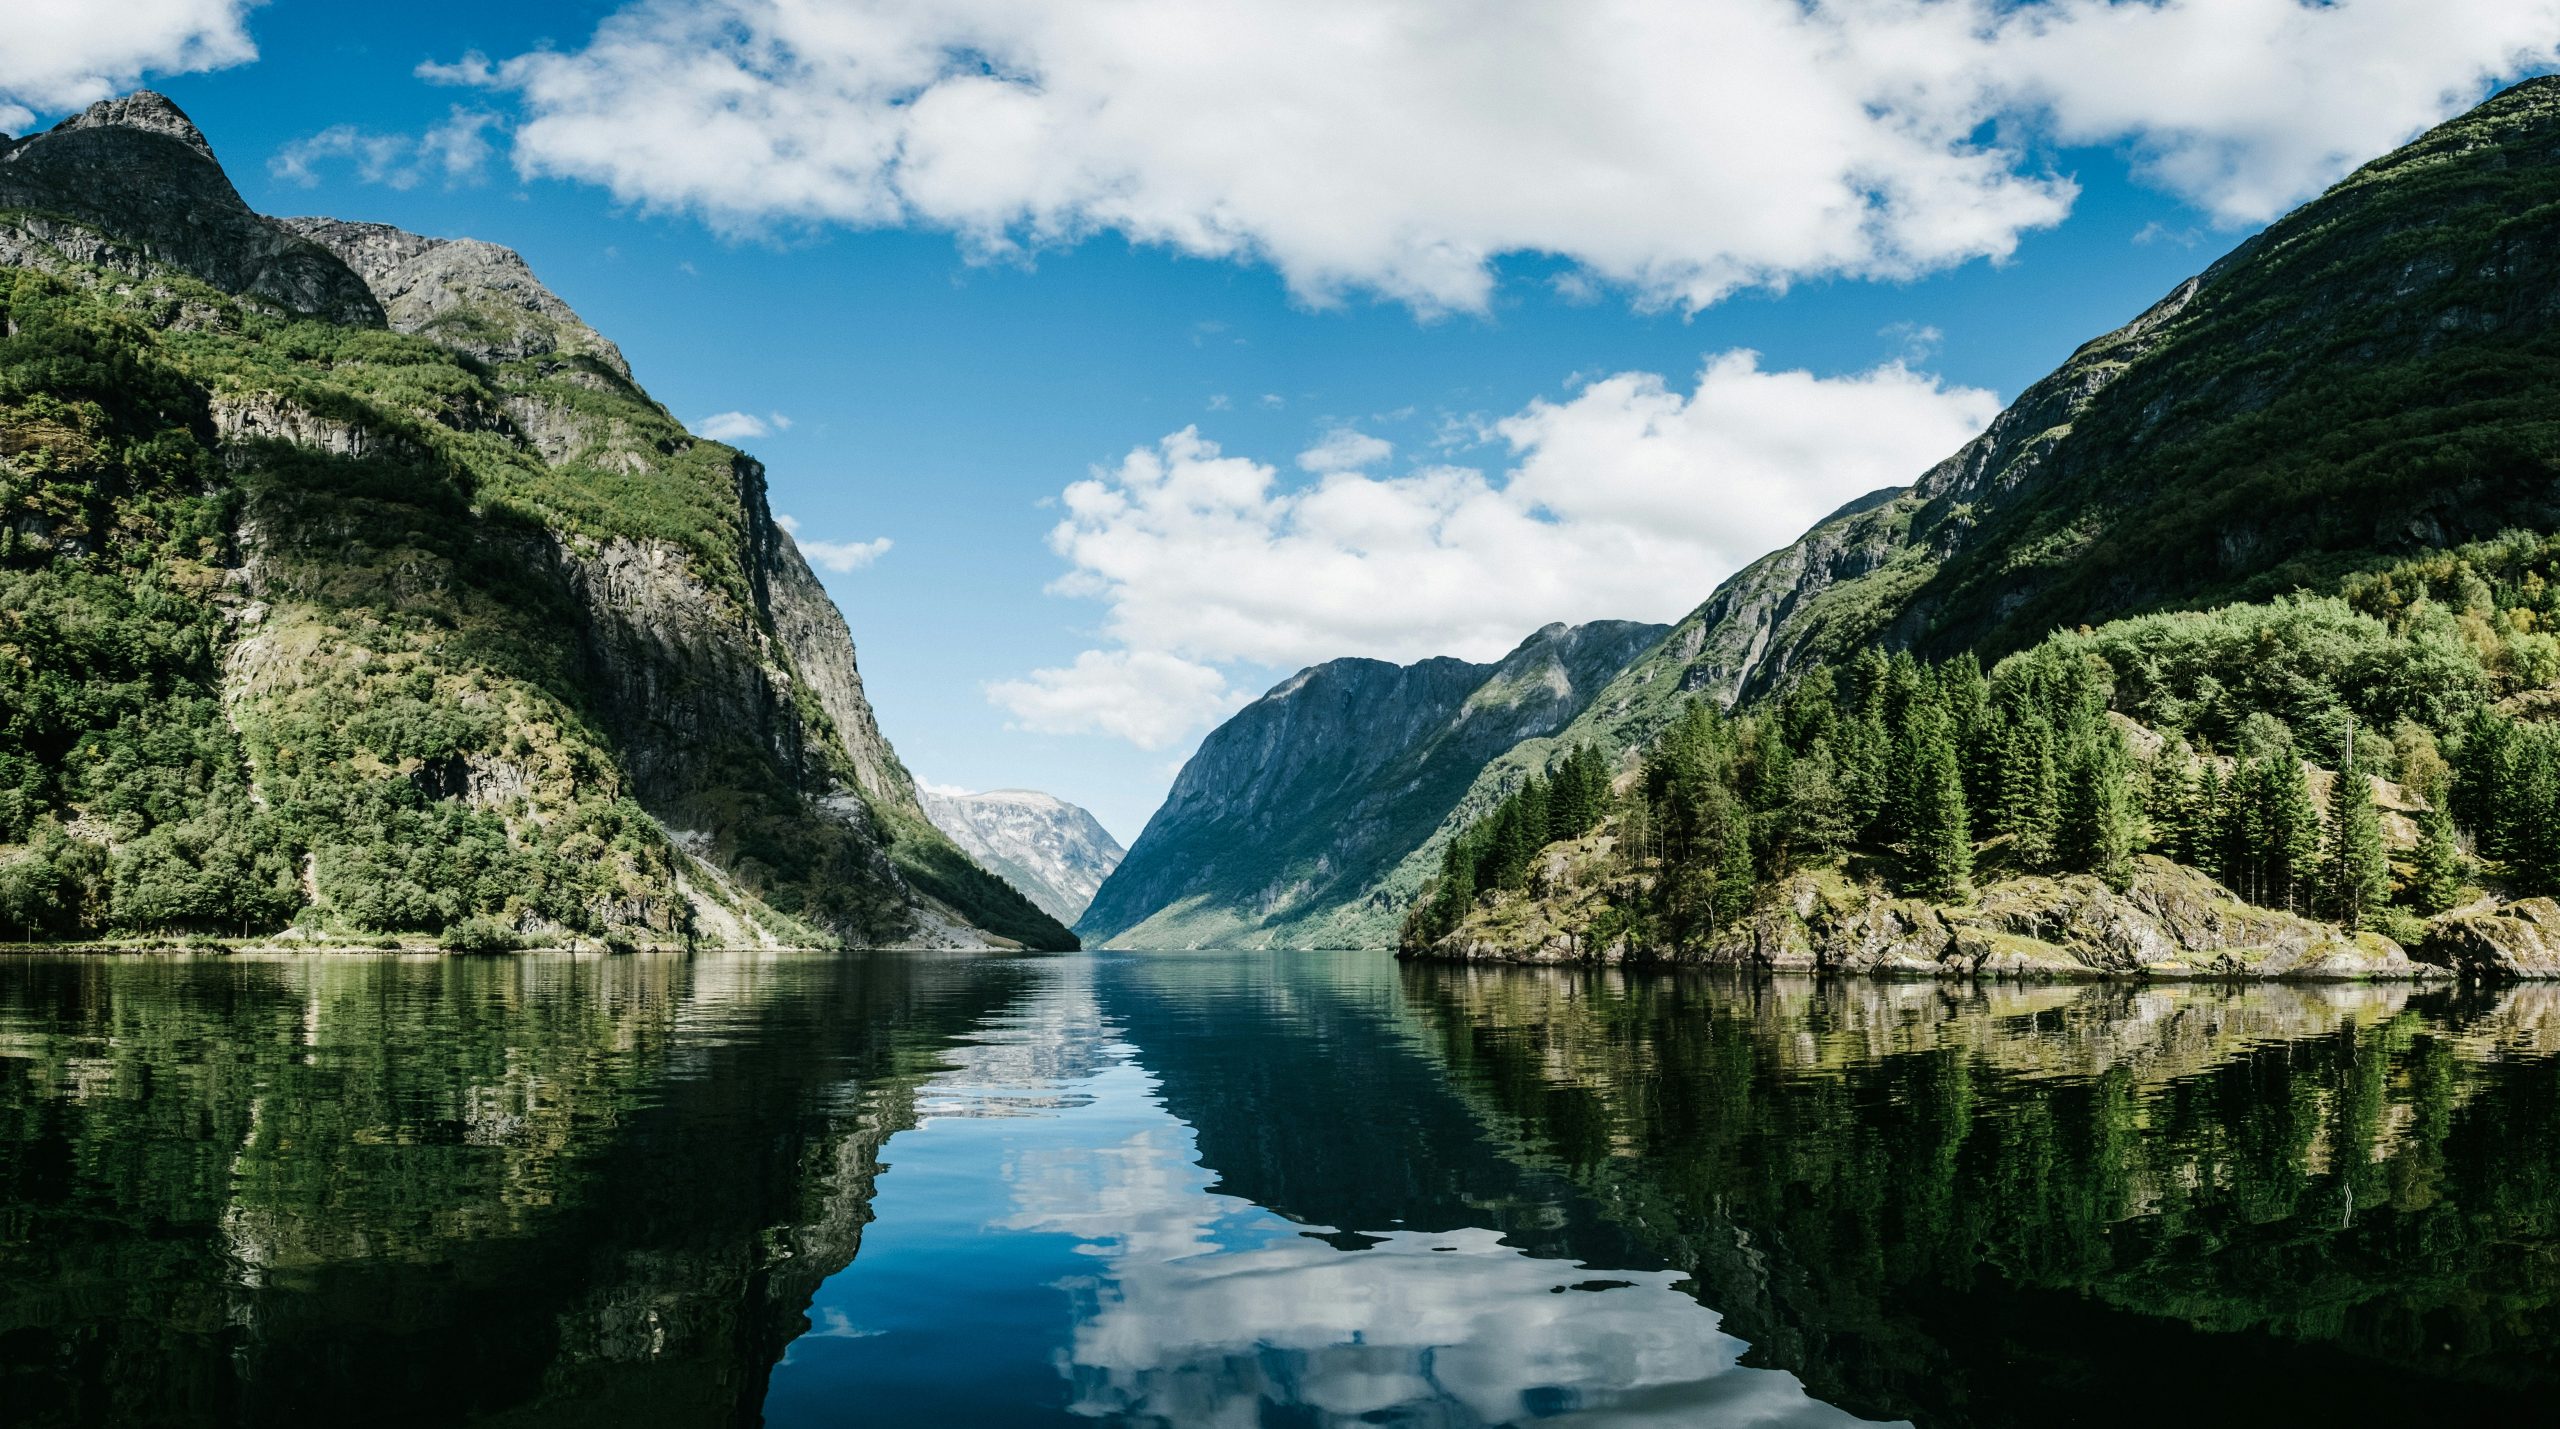 explore the breathtaking fjords of norway and immerse yourself in the stunning natural beauty of this unique landscape.